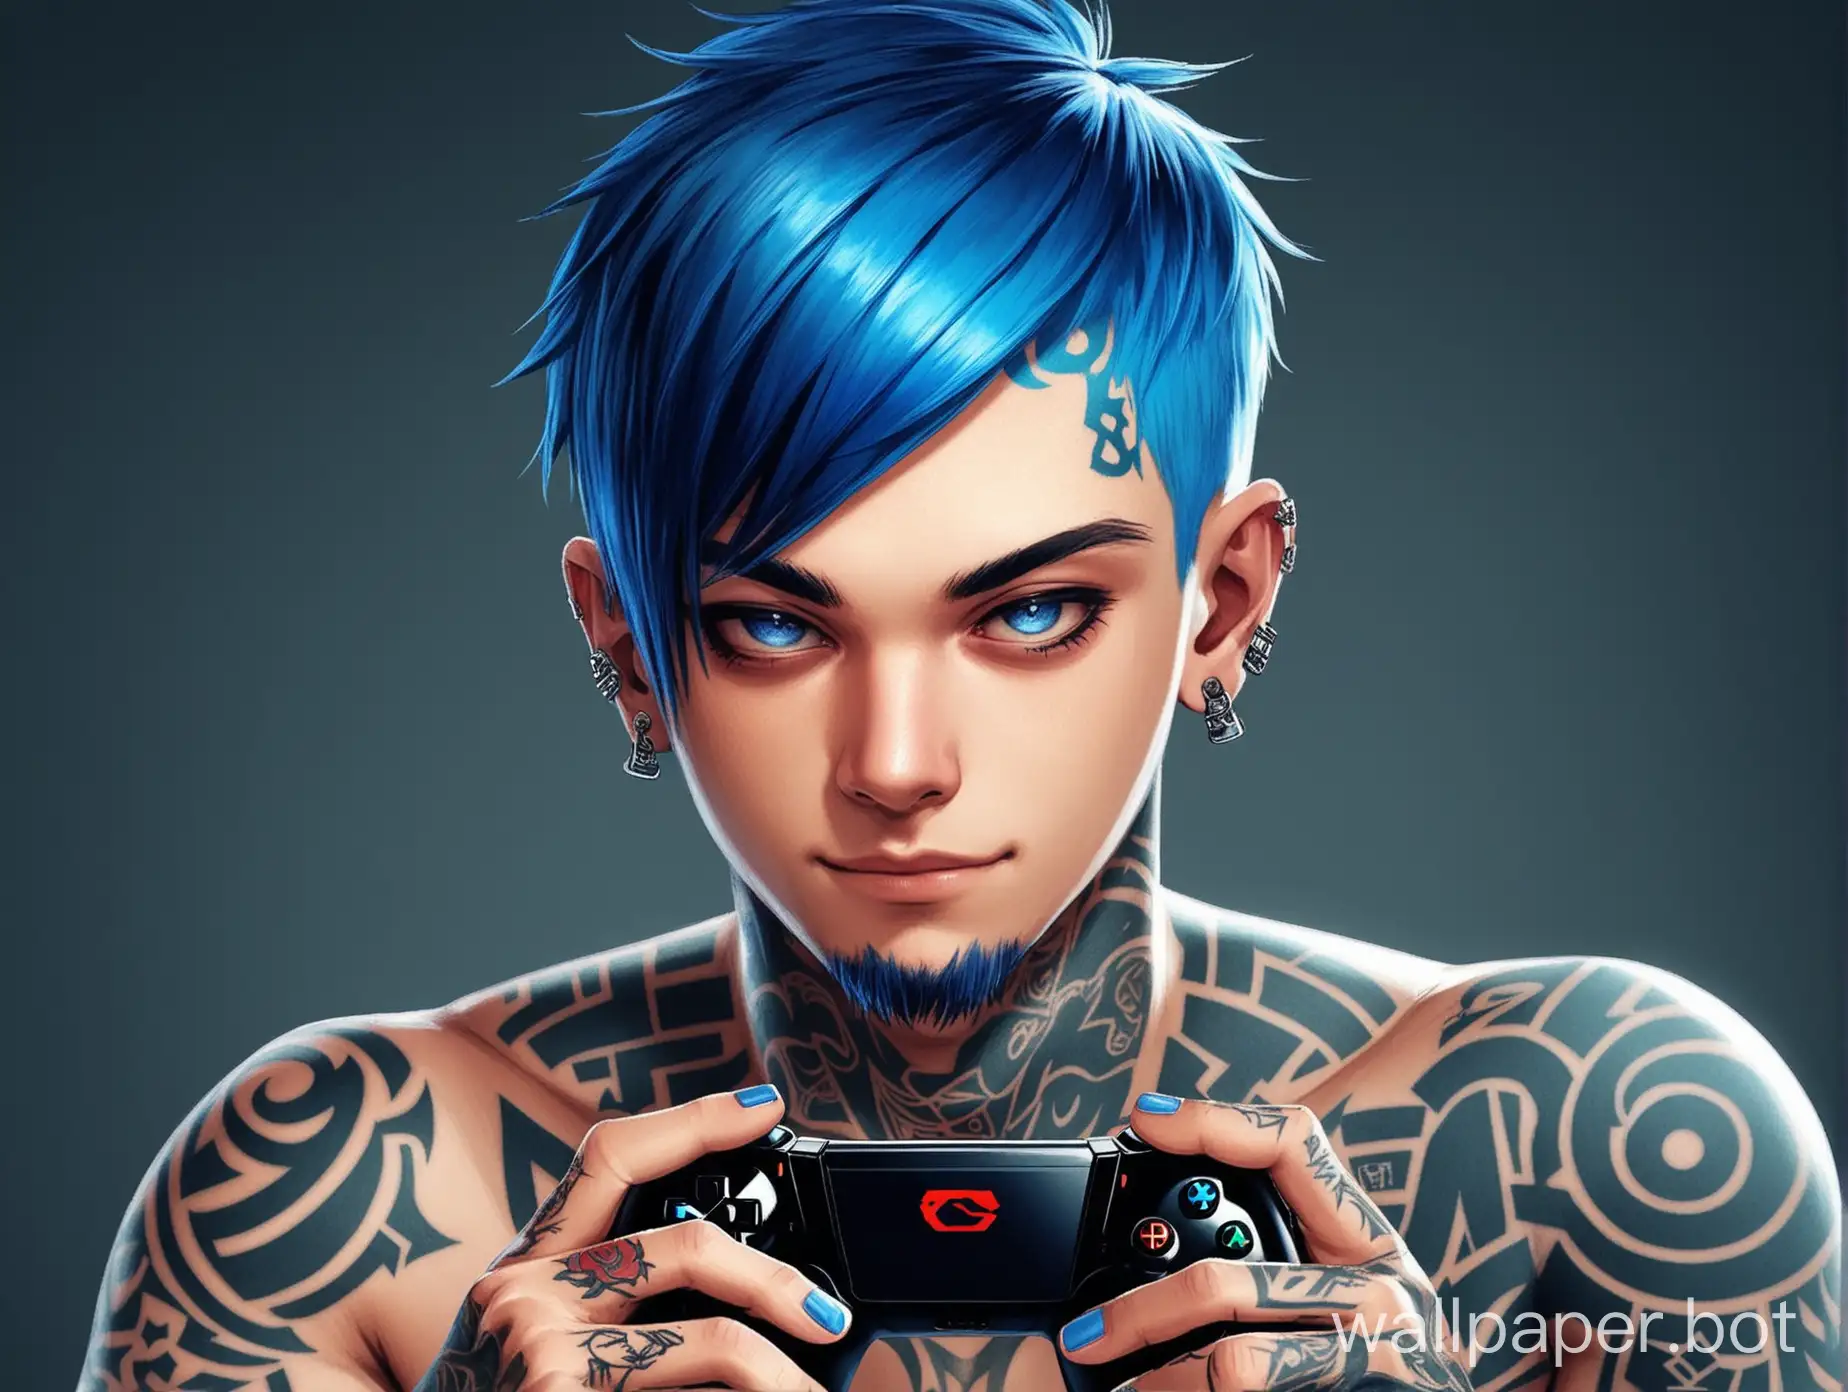 Gamer-Guy-with-Short-Blue-Hair-and-Tattoos